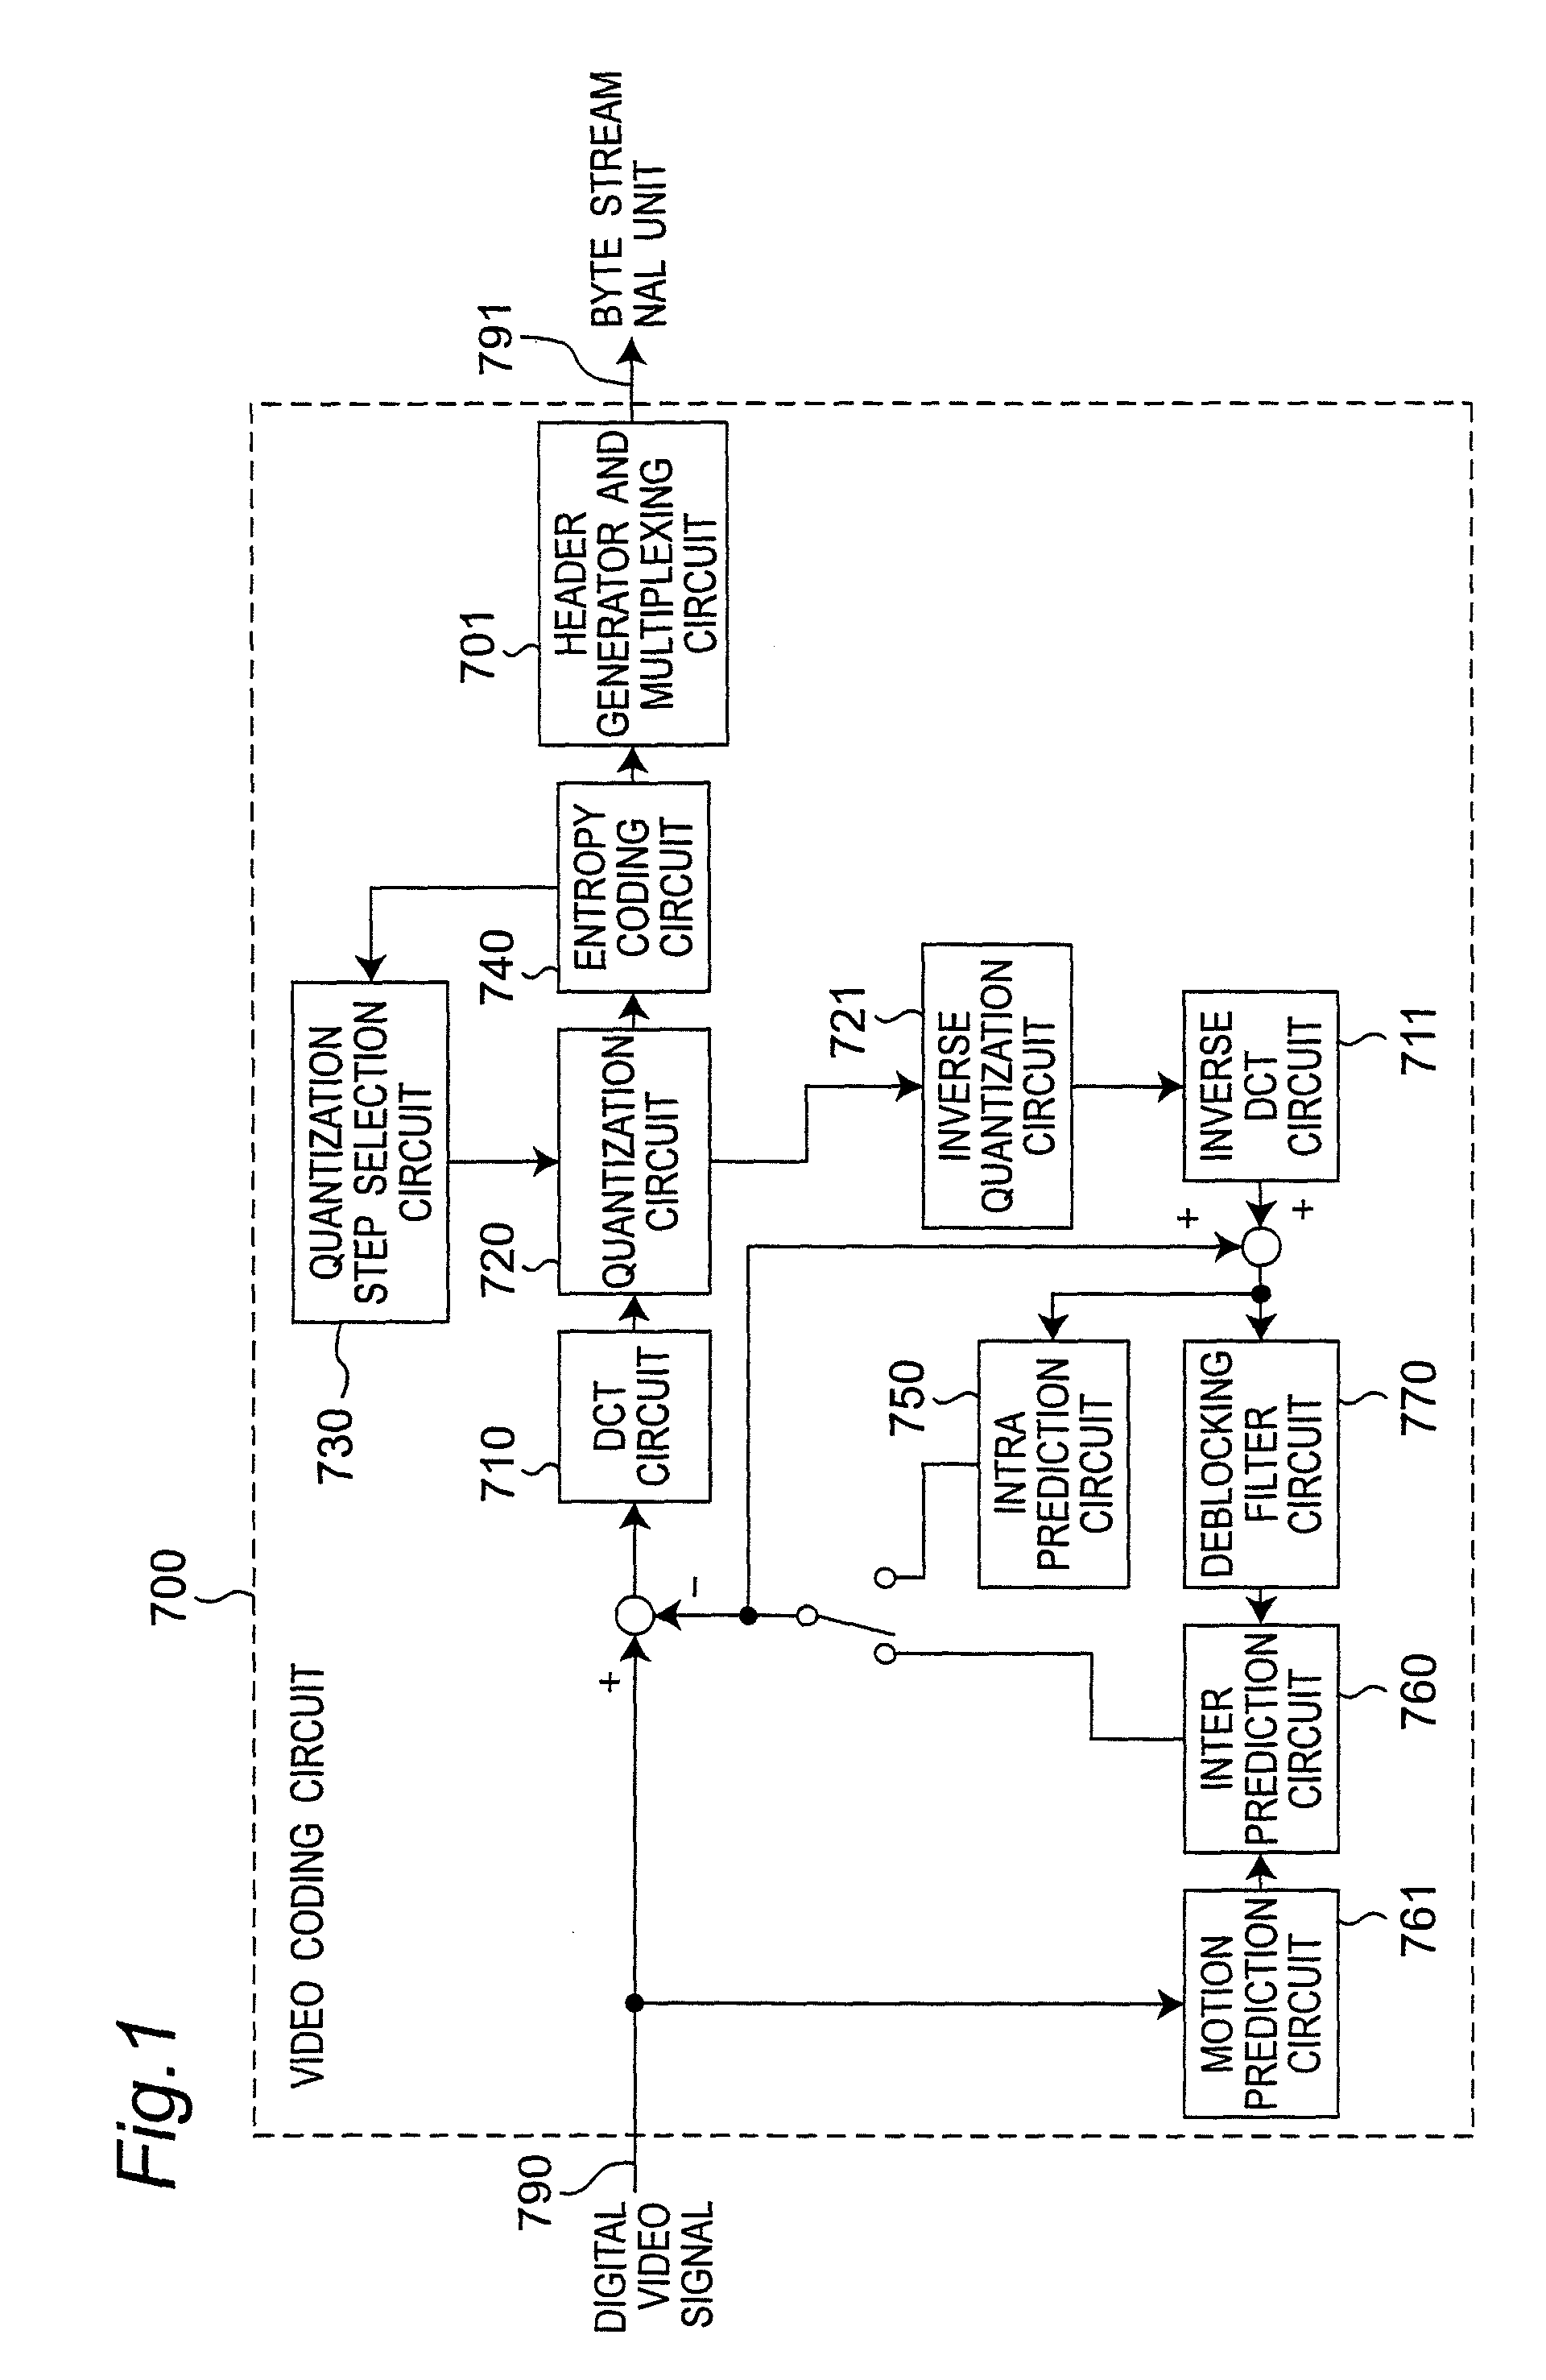 Coding device and editing device